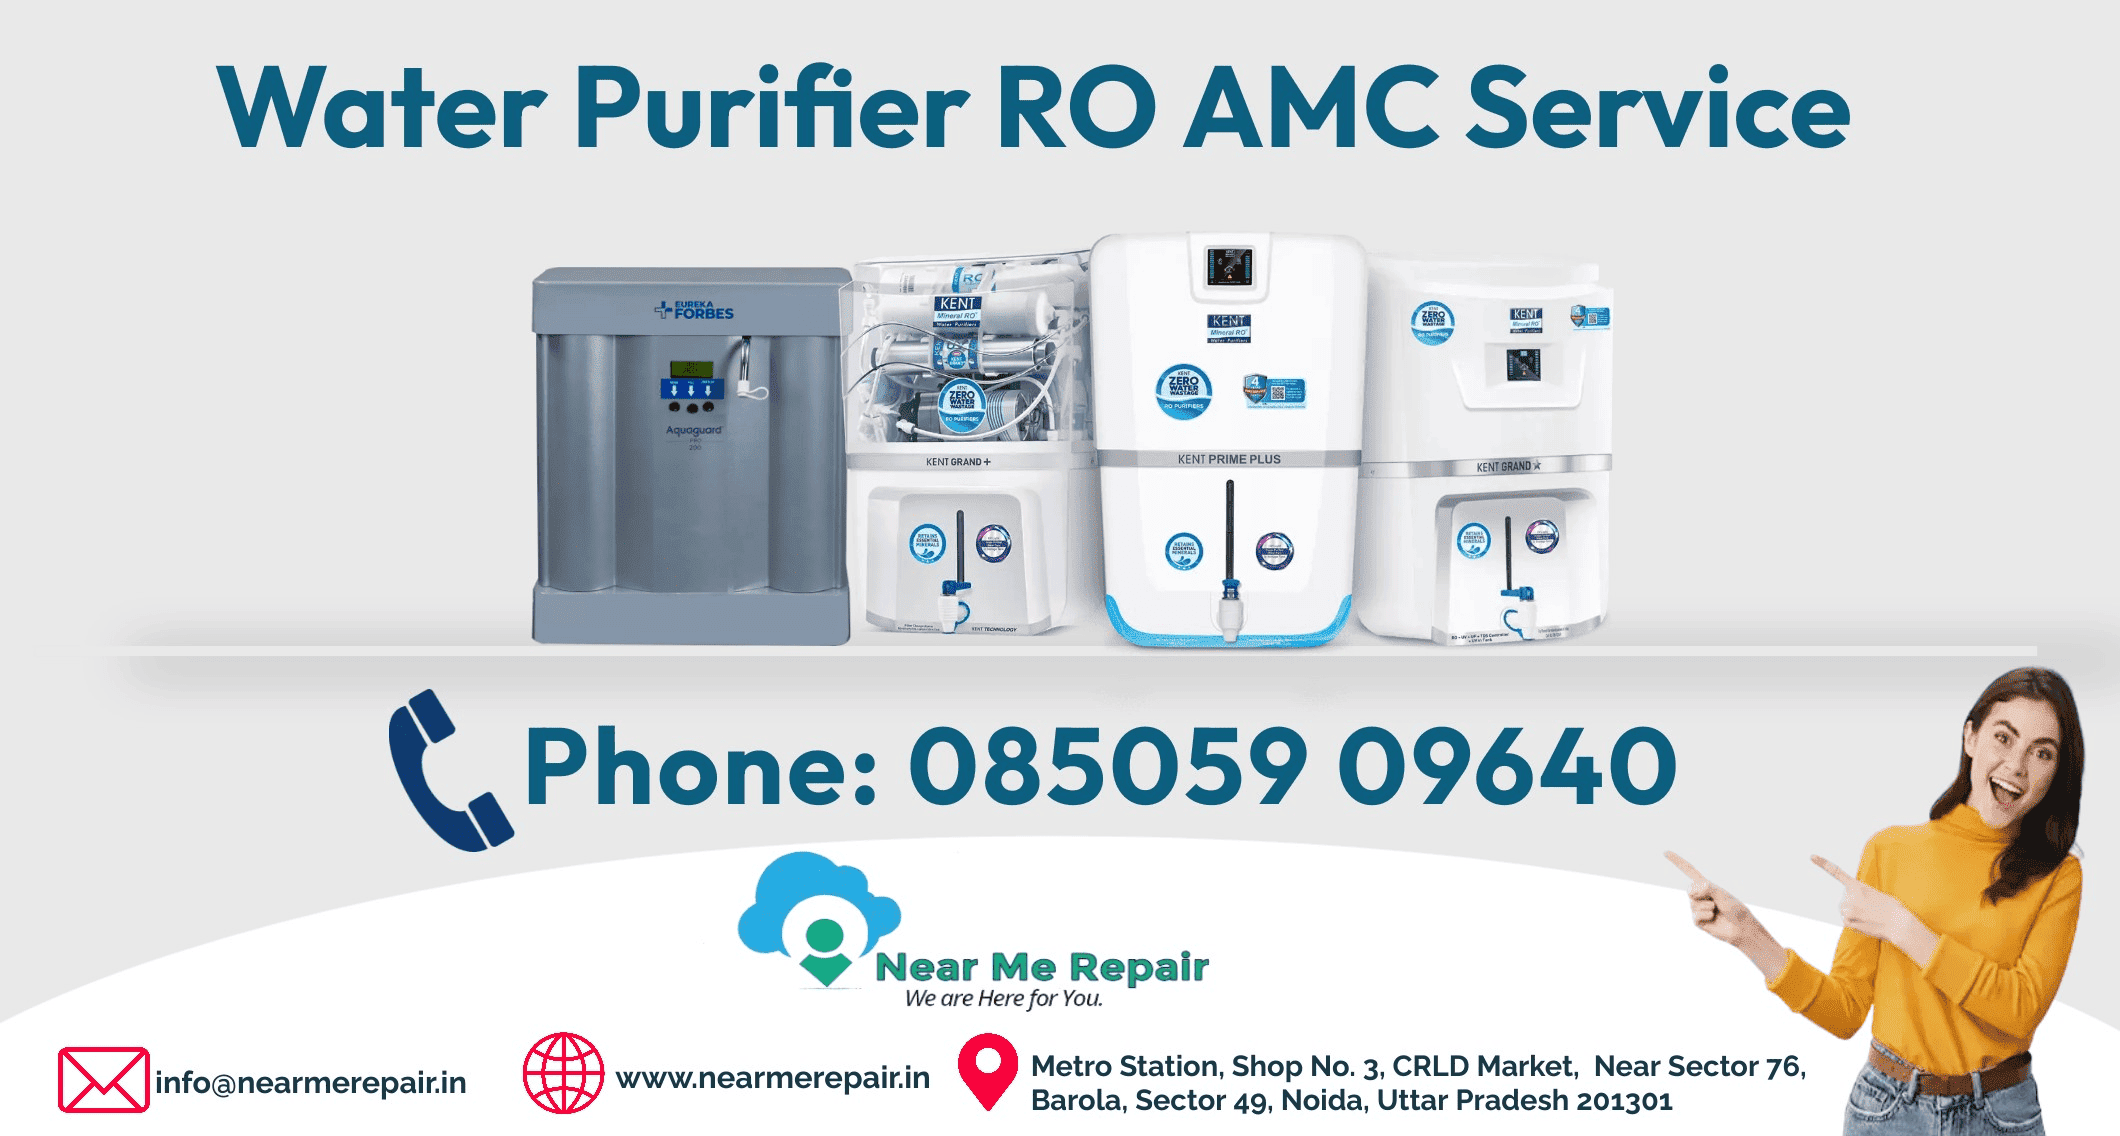 Discover the best in water purification with our premium Water Purifier RO AMC services near Delhi-NCR, ensuring optimal performance and reliability.